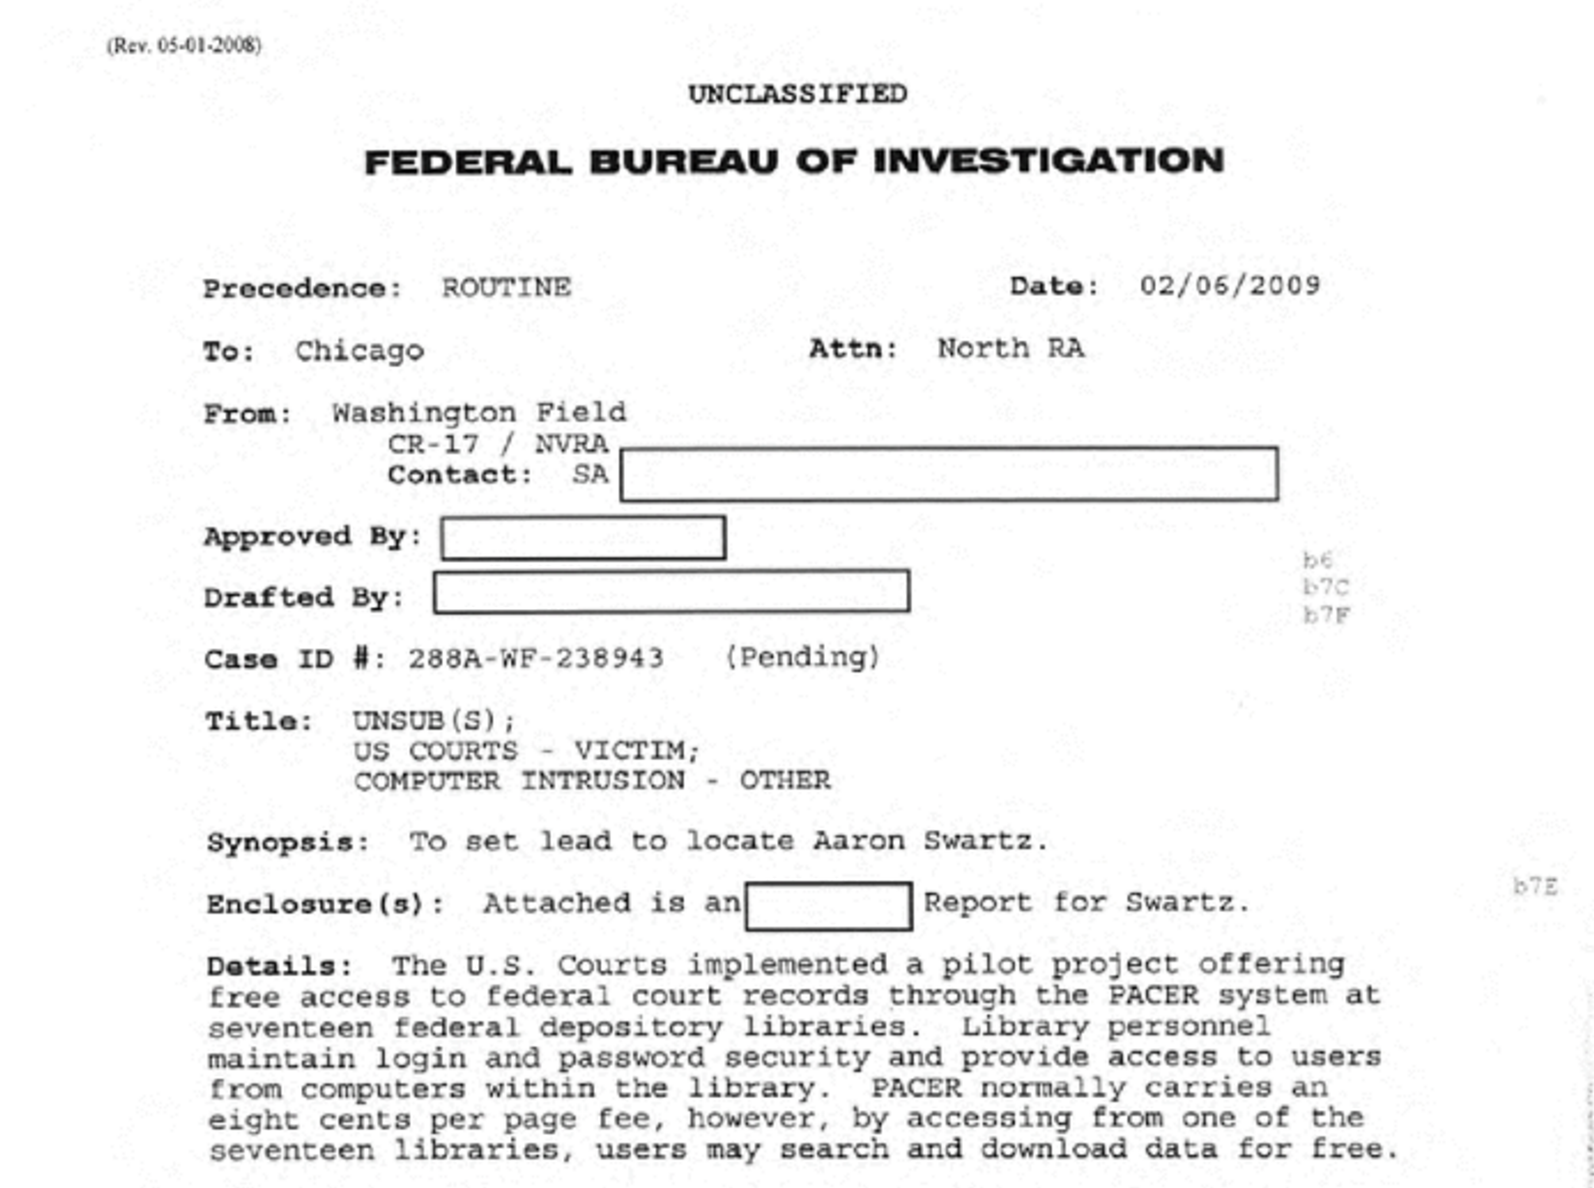 First FBI FOIA Letter Public Affairs Data Journalism at Stanford